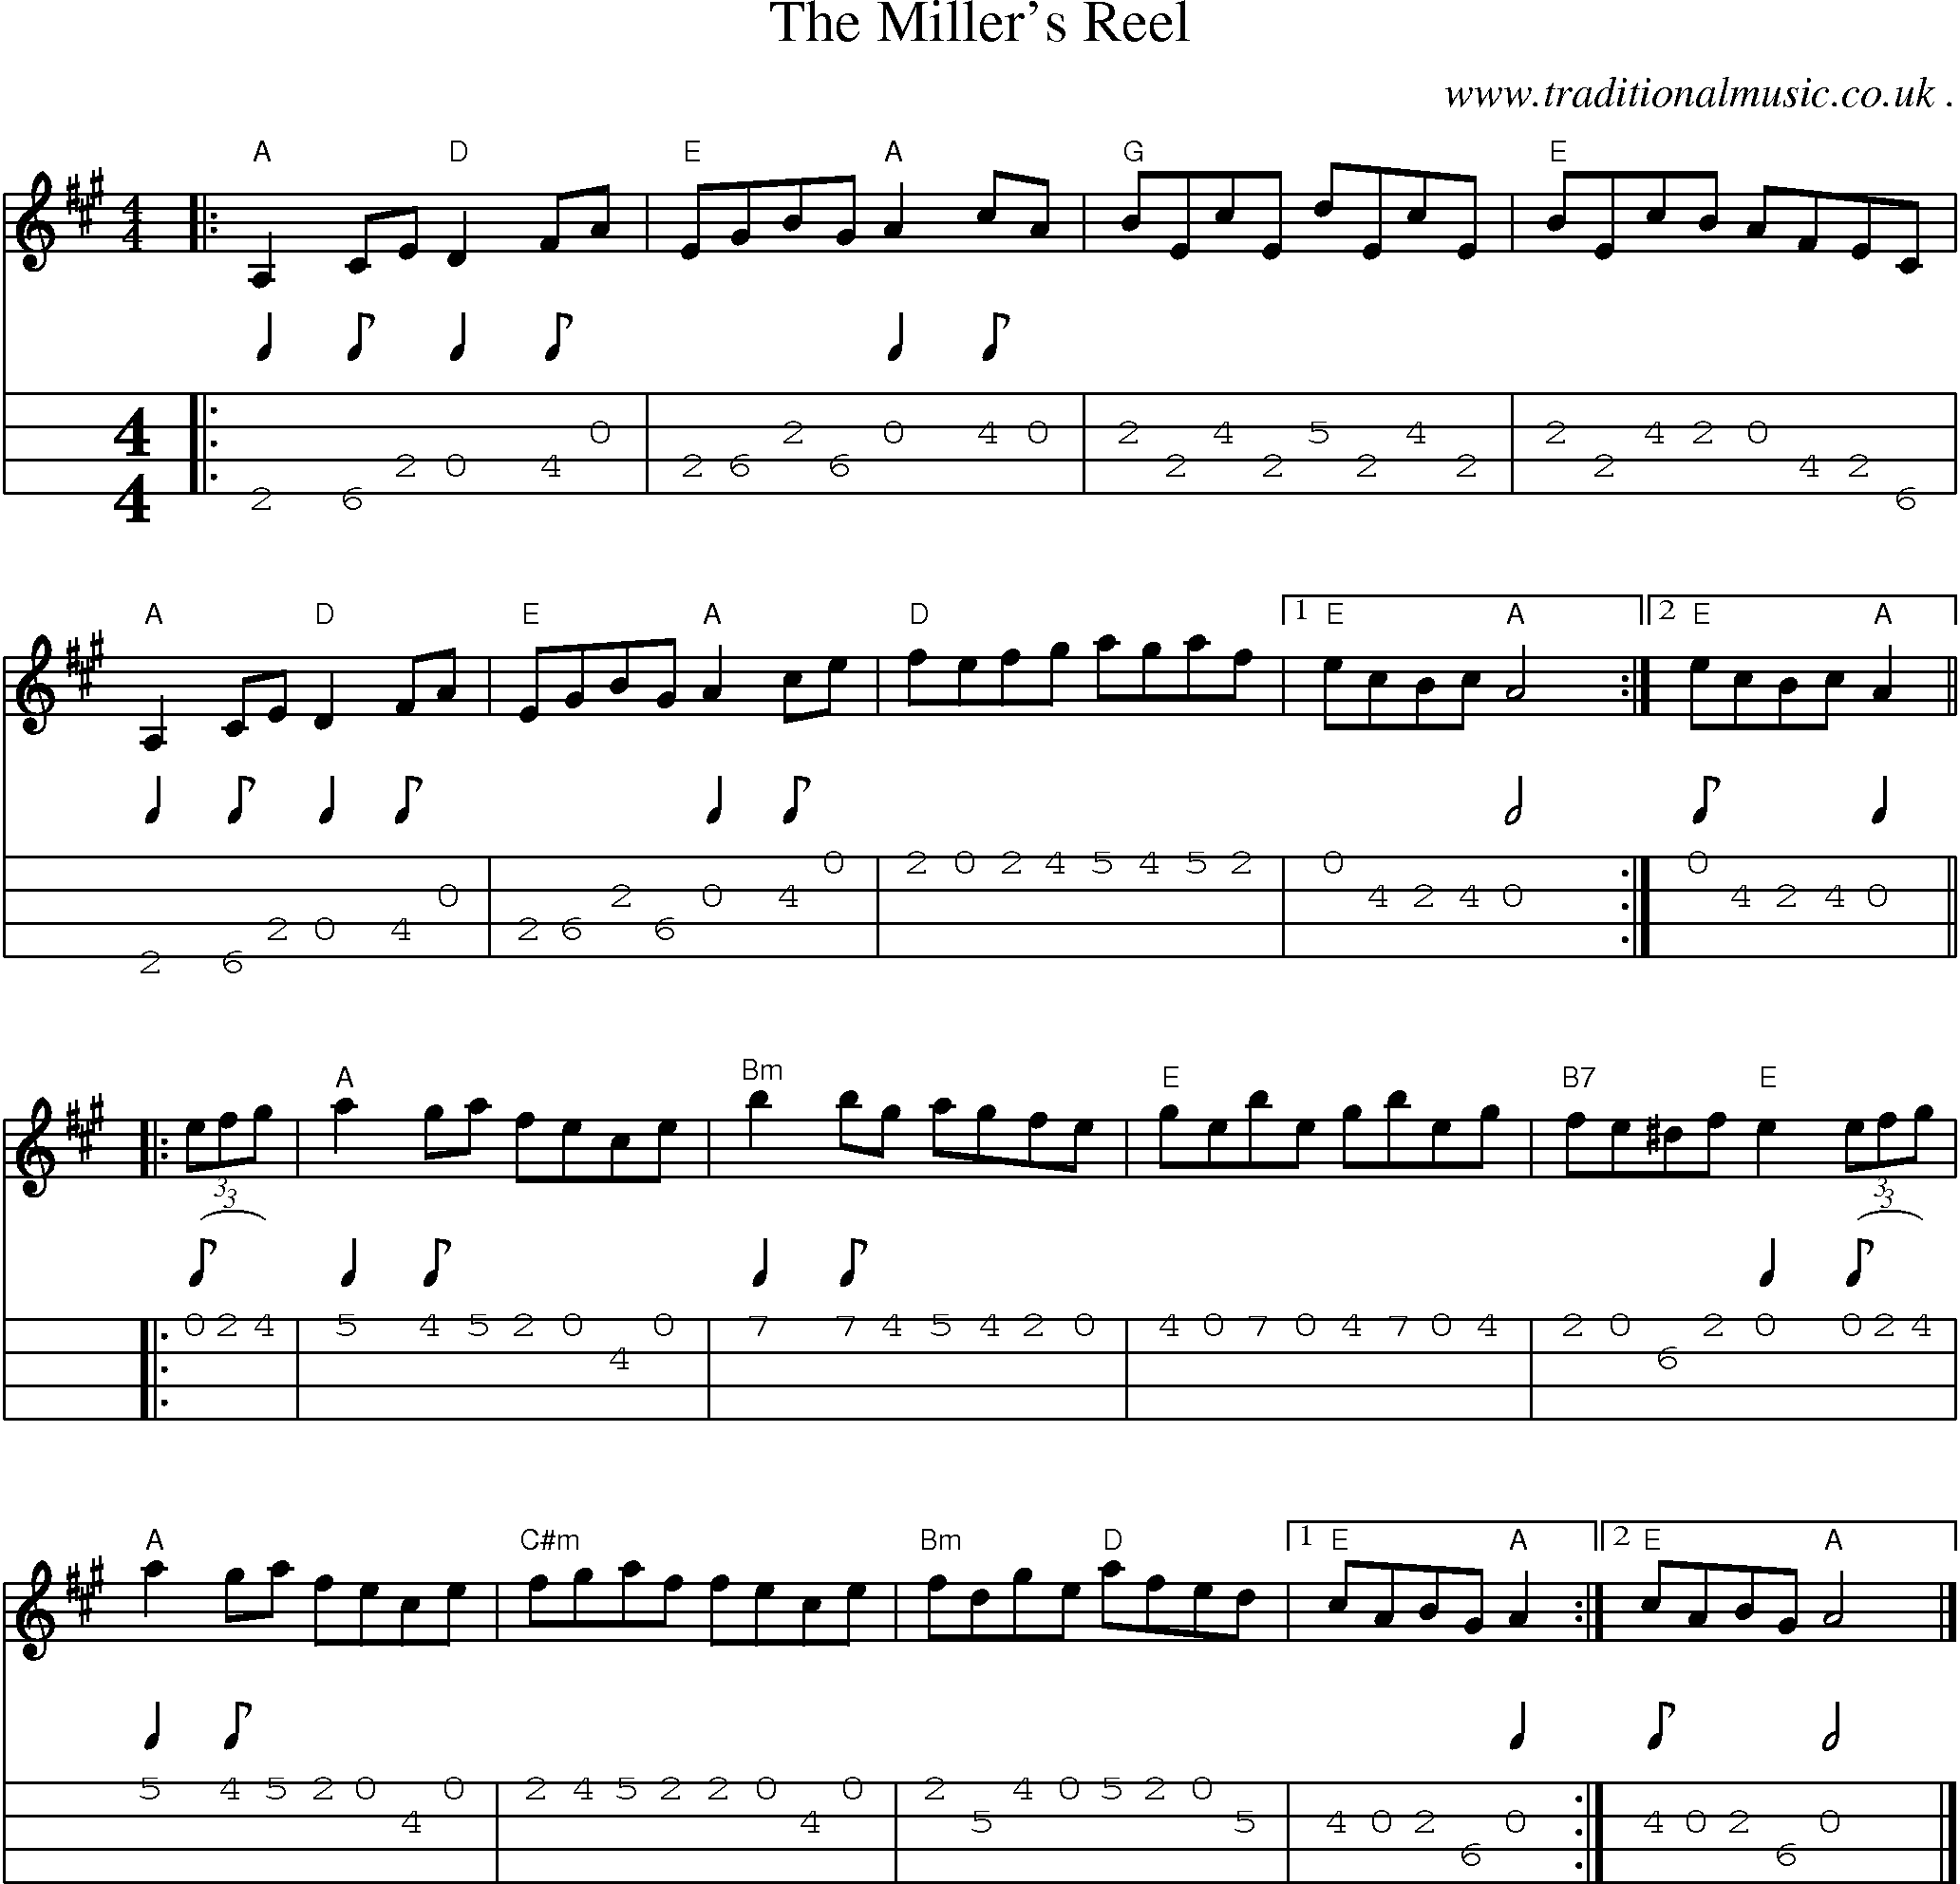 Music Score and Guitar Tabs for The Millers Reel